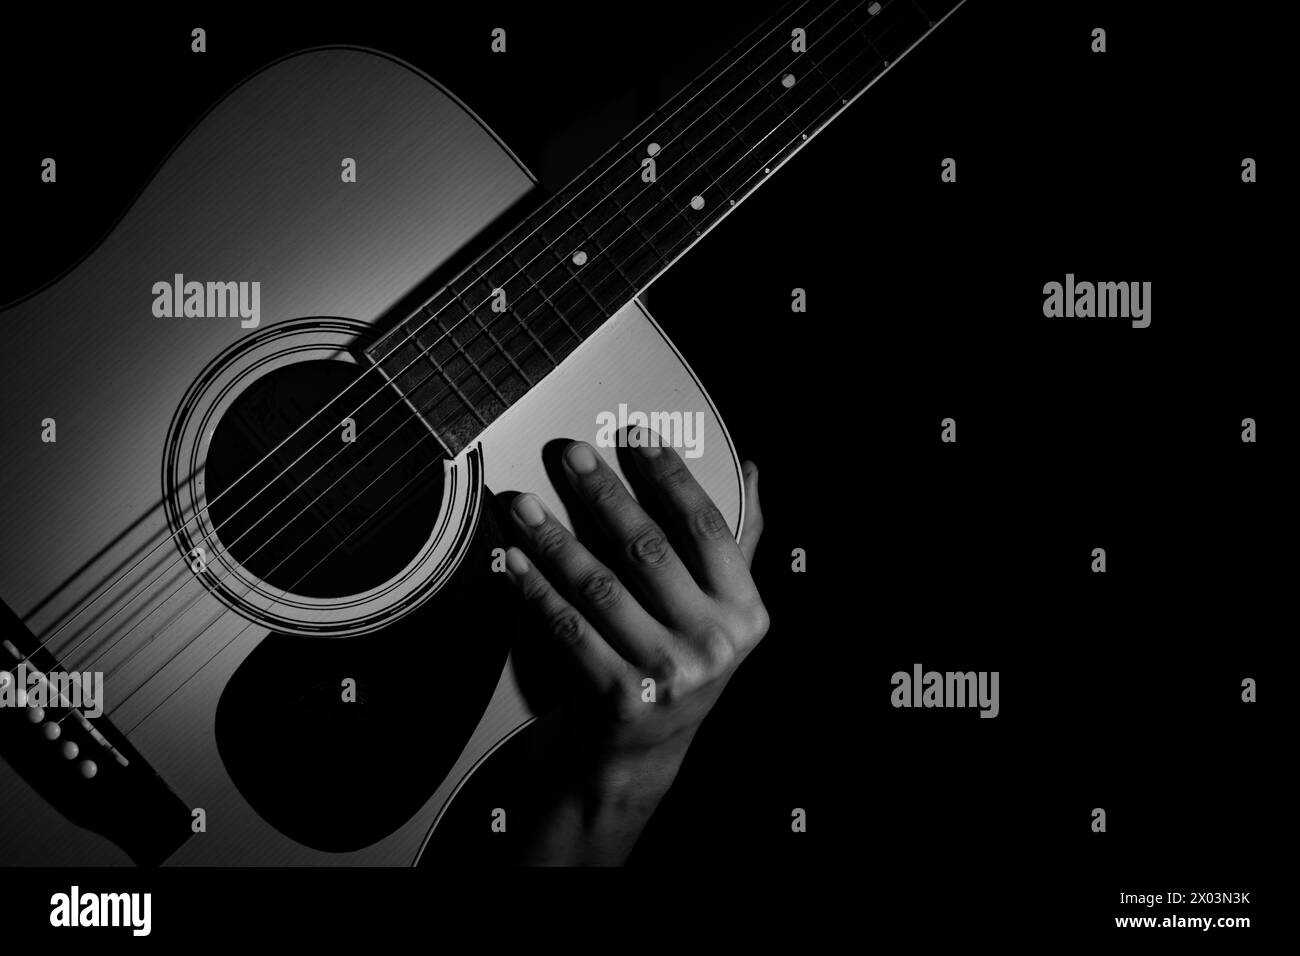 Man holding acoustic guitar. Music background Stock Photo